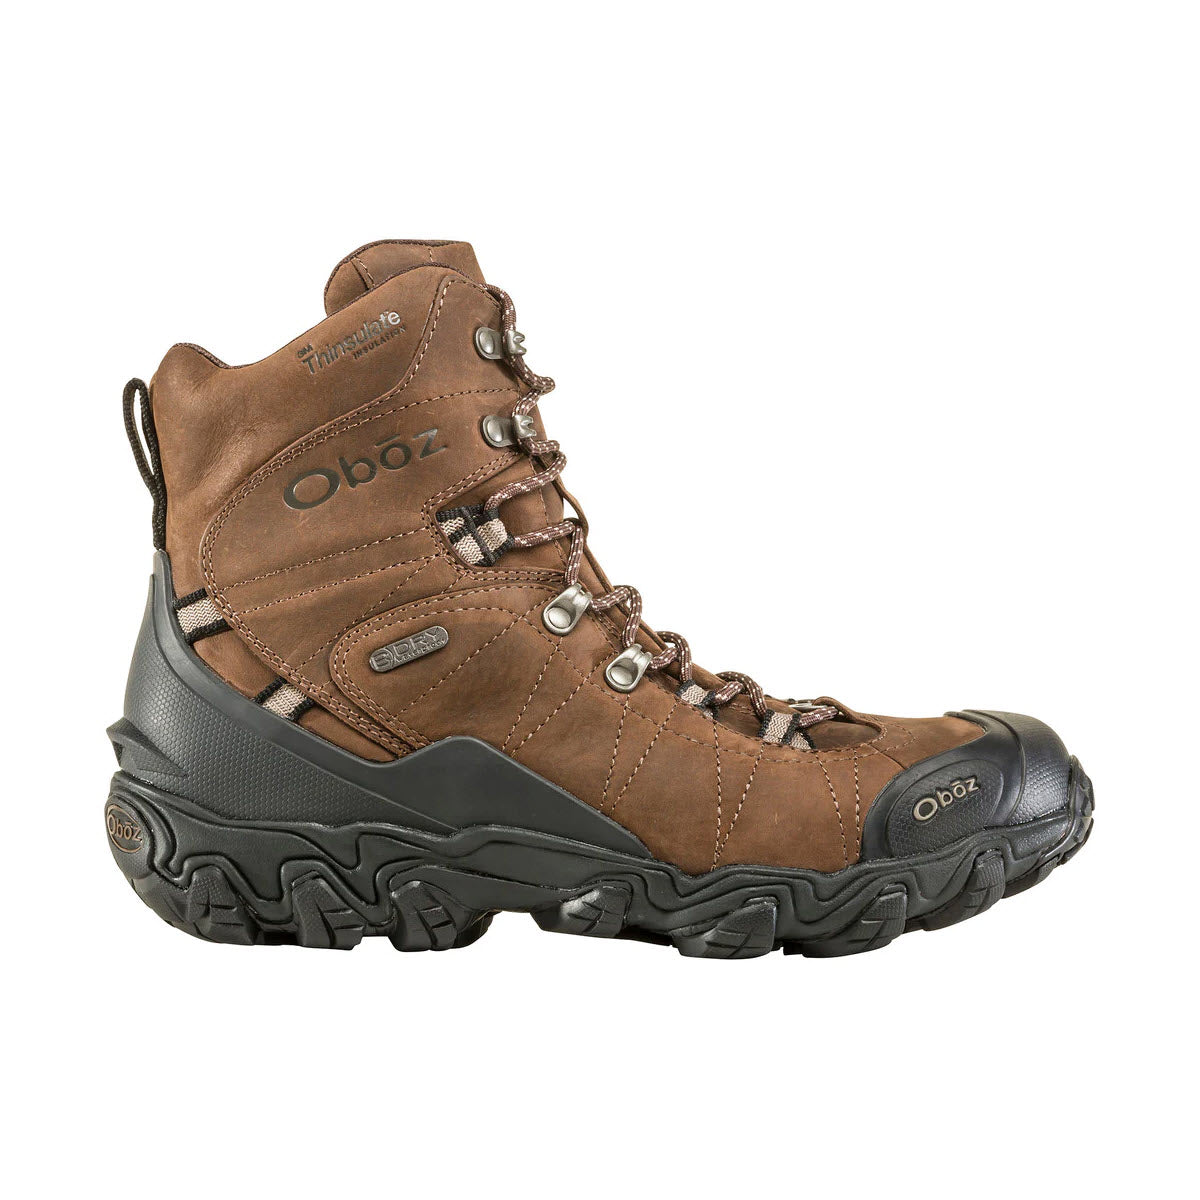 A single Oboz BRIDGER 8&quot; INSULATED B-DRY BARK hiking boot featuring a high-top design, brown leather upper, and sturdy black rubber sole, isolated on a white background.